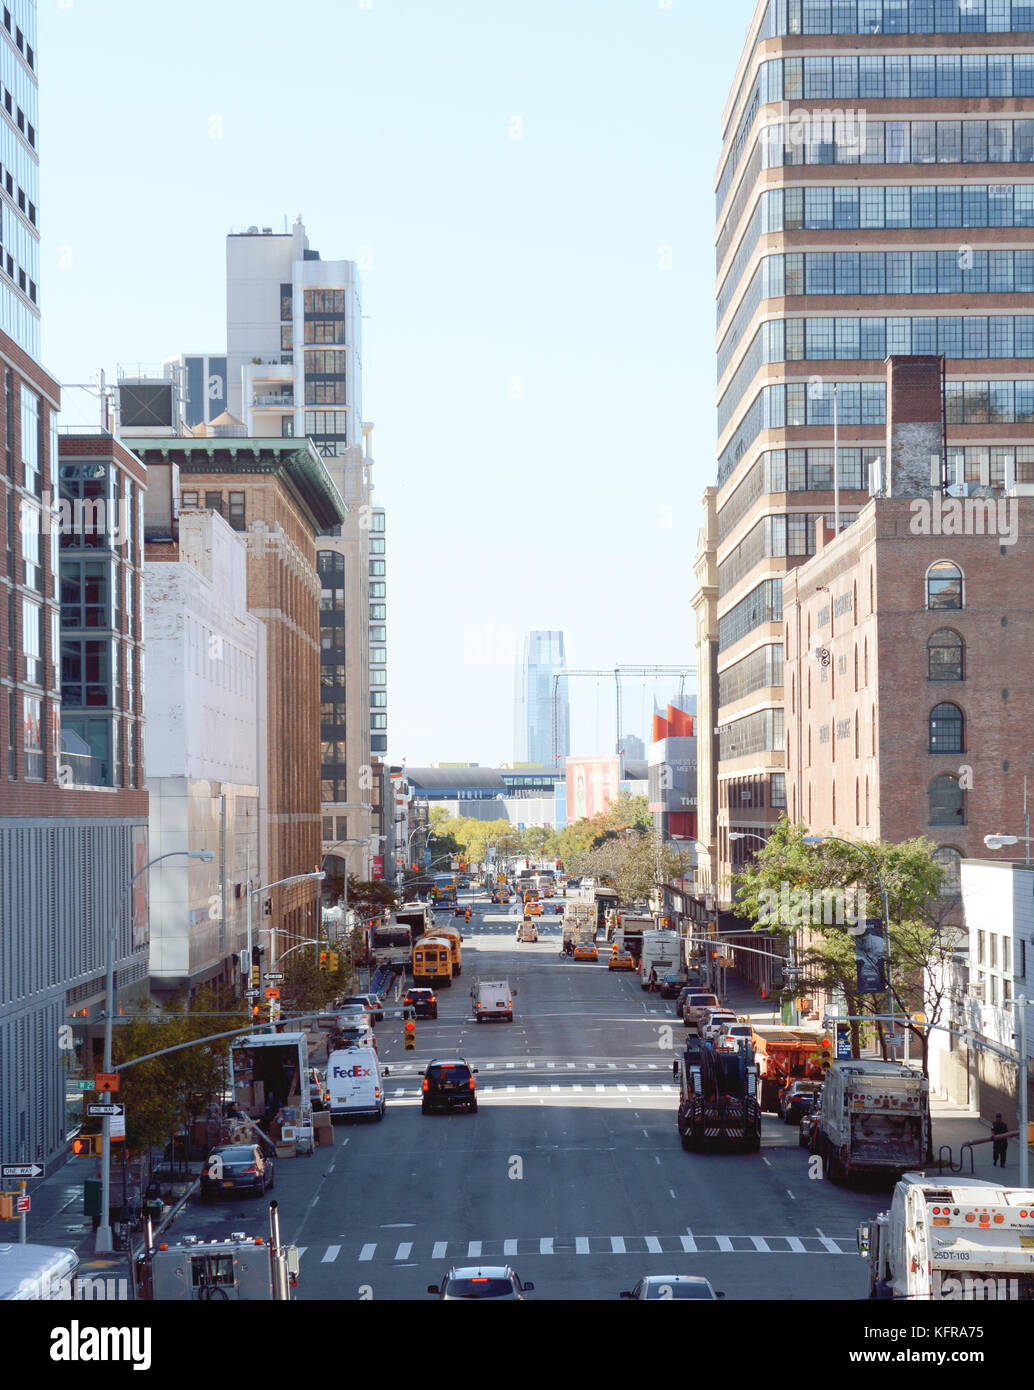 NEW YORK - OCTOBER 20, 2017: View south down 11th Avenue in Manhattan, seen from the High Line elevated park. Traffic travels down the one way street  Stock Photo